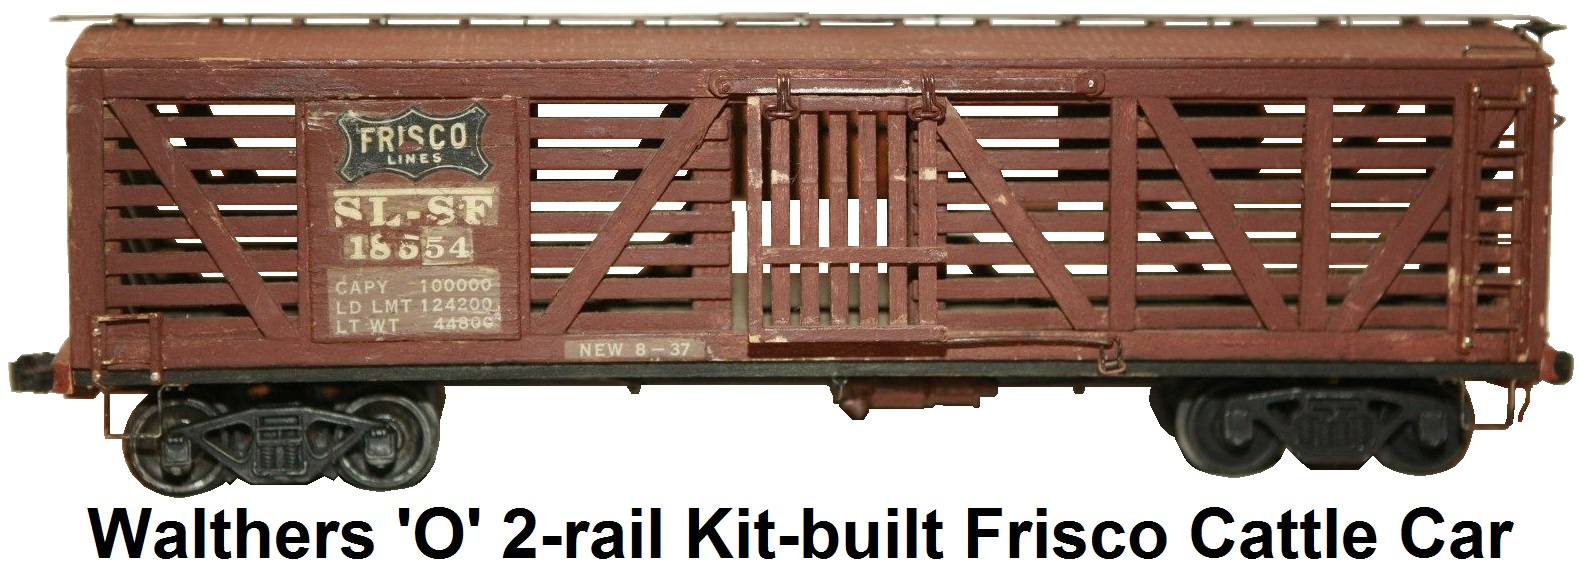 Walthers 'O' scale Kit-built 2-rail Frisco Cattle Car